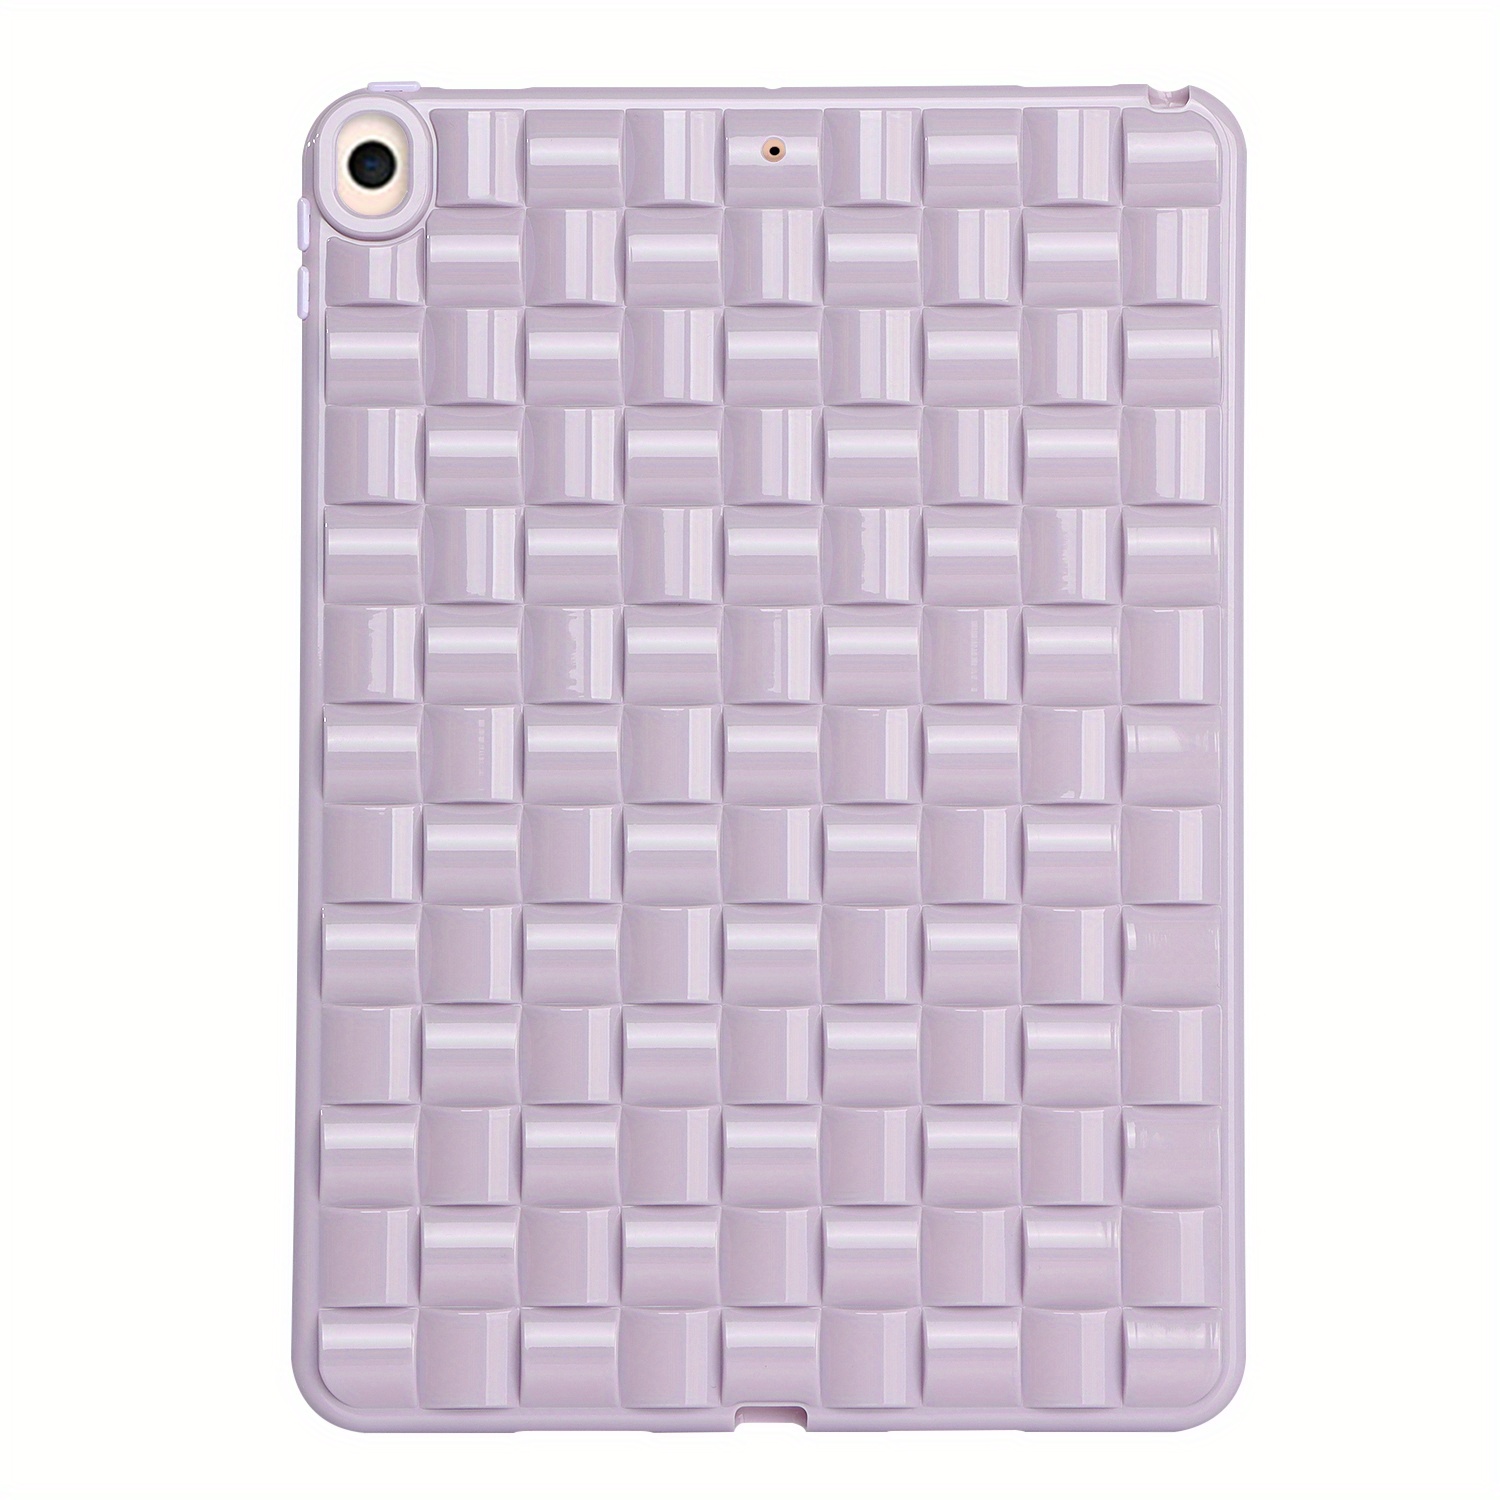 New Ipad Mini 2022rubber Solid Case For Ipad 10th/11th/9th/air 5